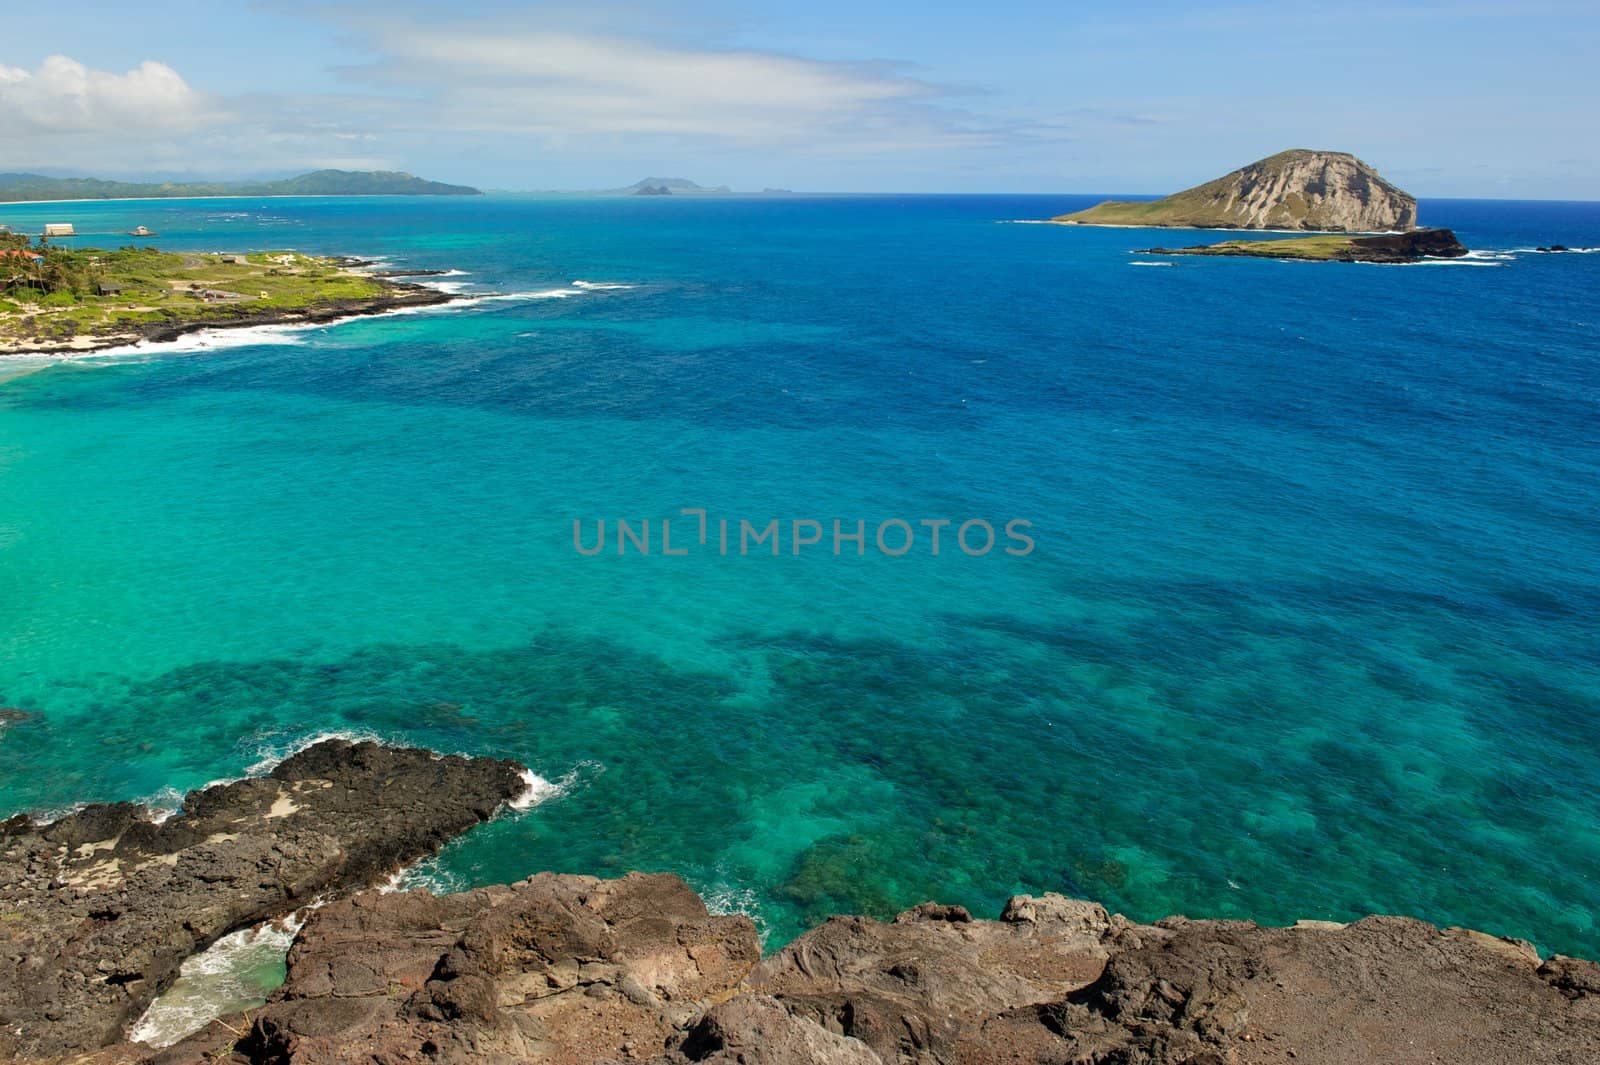 A horizontal shot of the blue and green water off the north coast of the island of Oahu in Hawaii showing several small islands